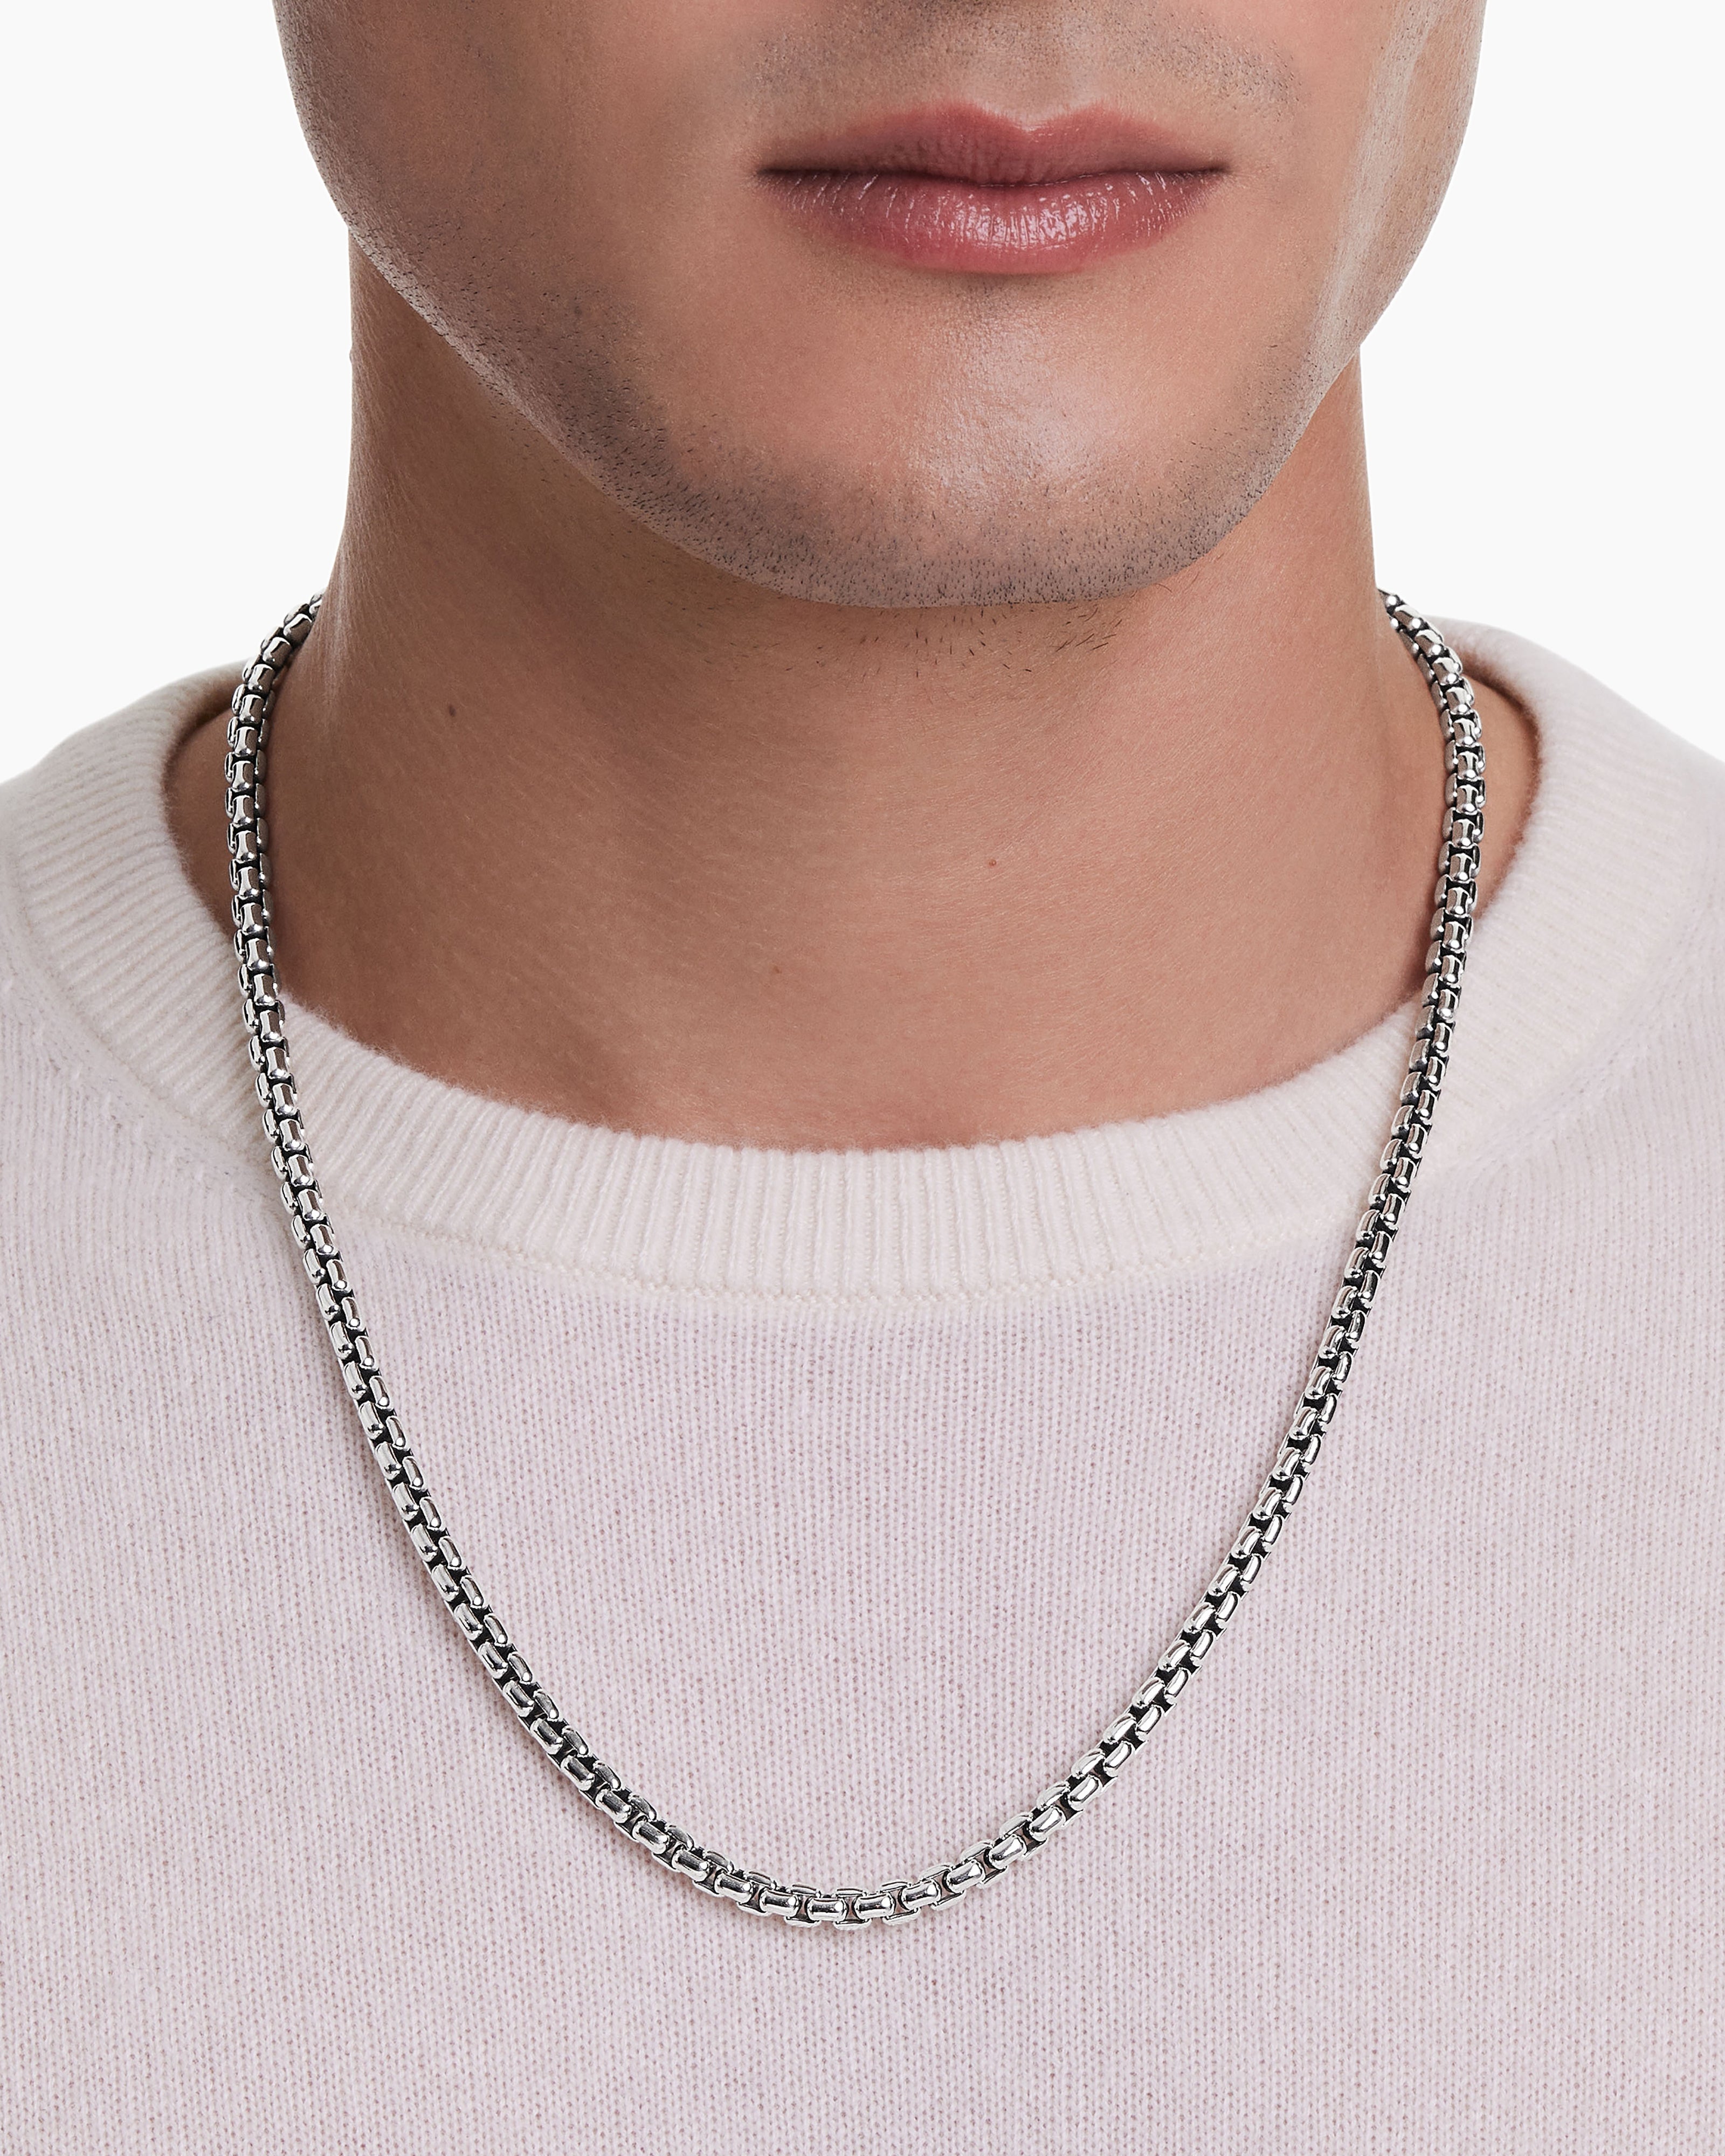 Solid 925 Sterling Silver Men's Baguette Tennis Chain Real Iced Diamond Hip  Hop